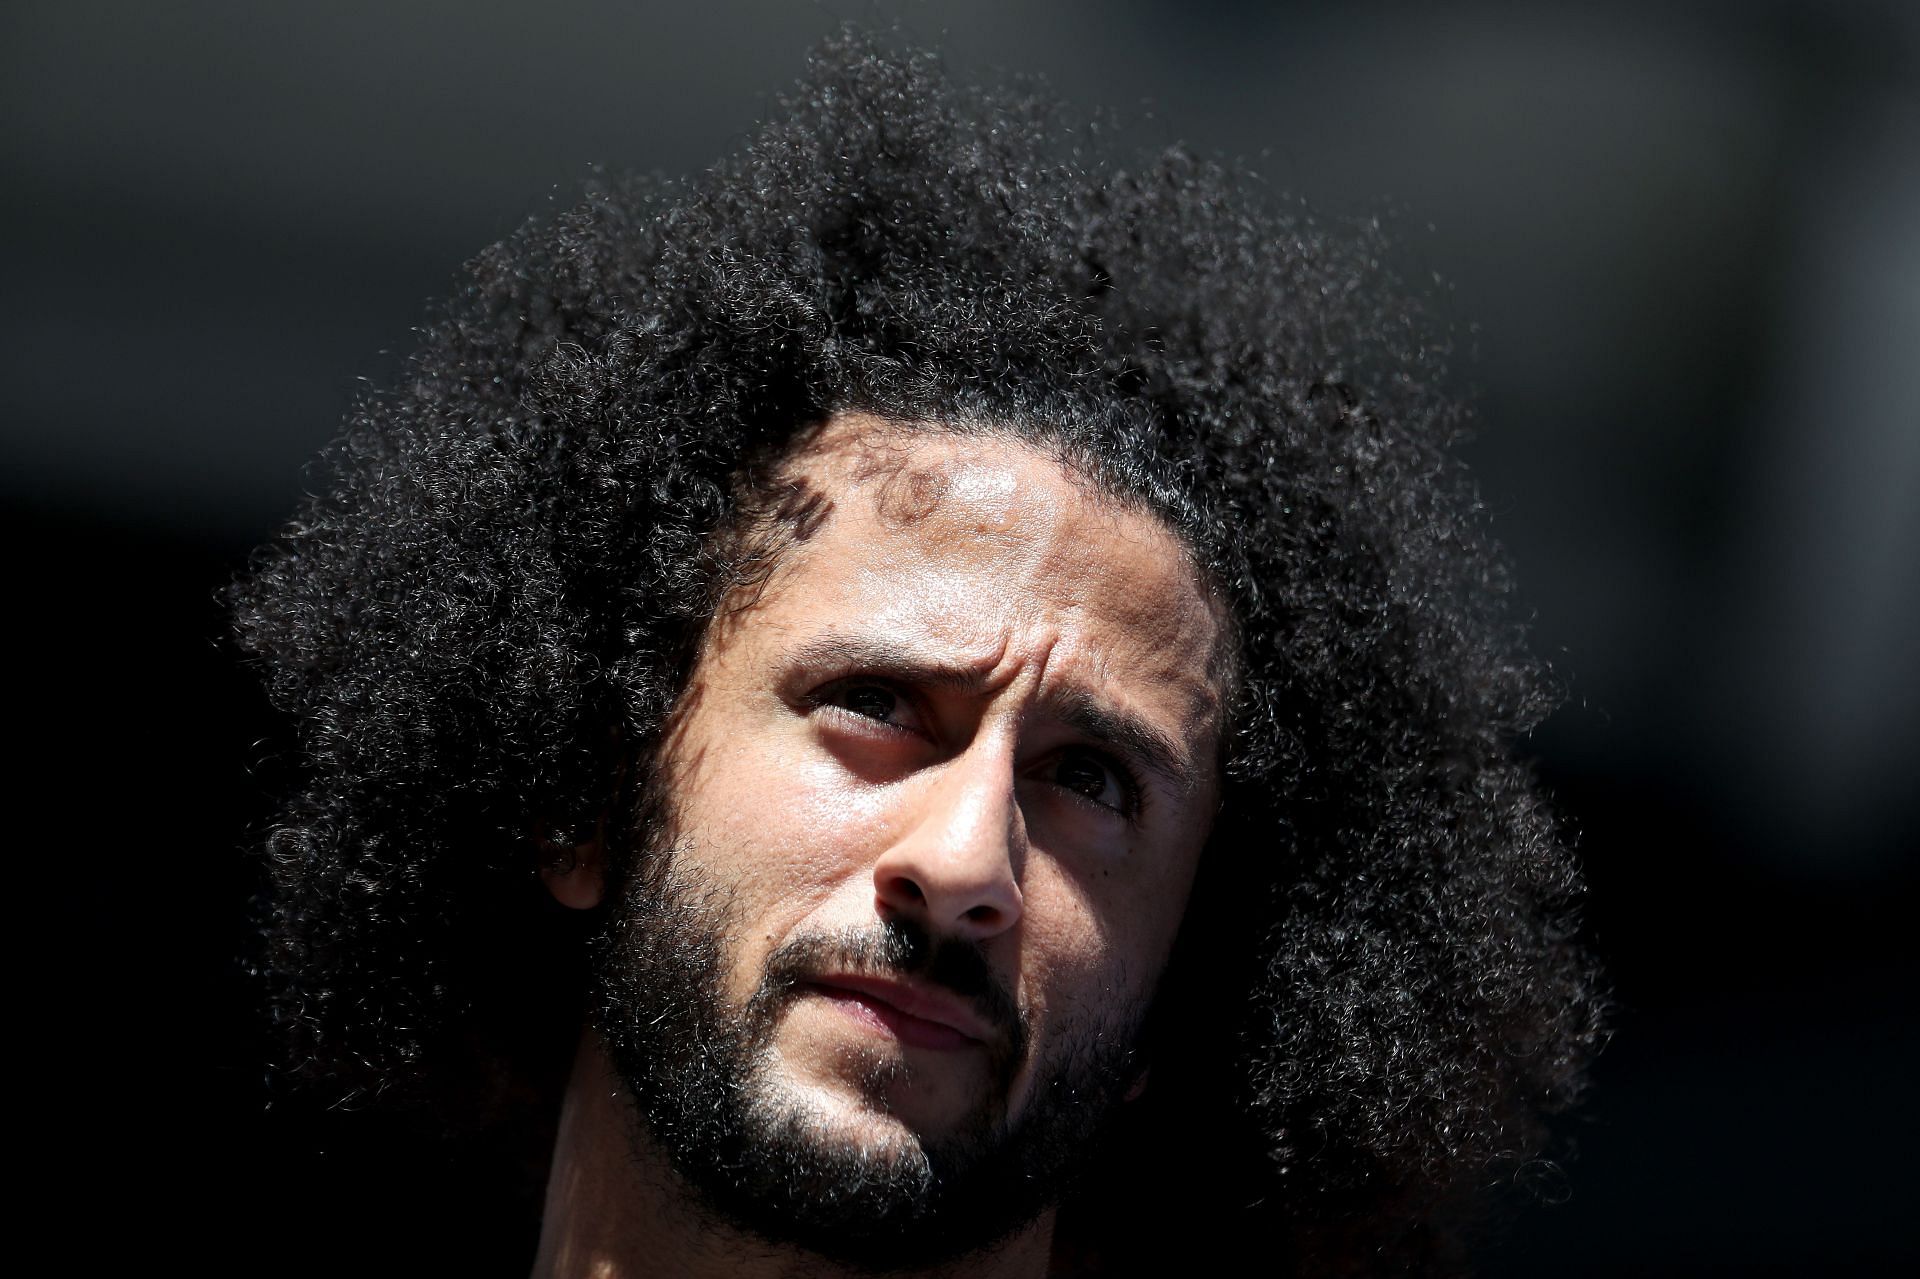 Colin Kaepernick worked out with the Las Vegas Raiders, but no signing has been announced.